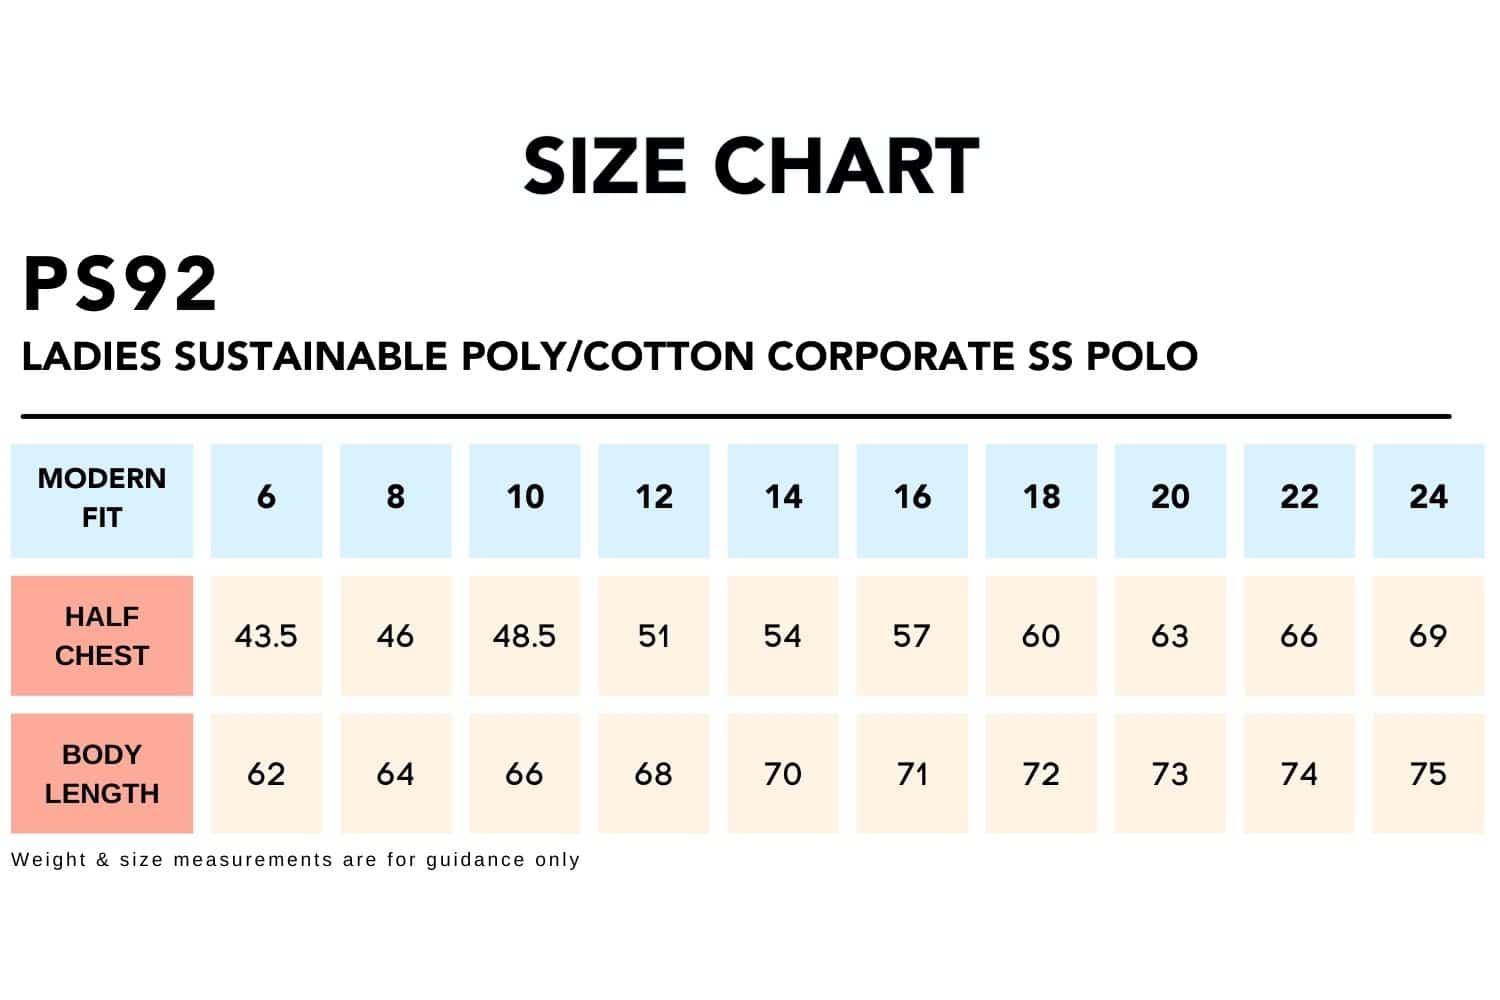 Size-Chart_PS92-LADIES-SUSTAINABLE-POLYCOTTON-CORPORATE-SS-POLO